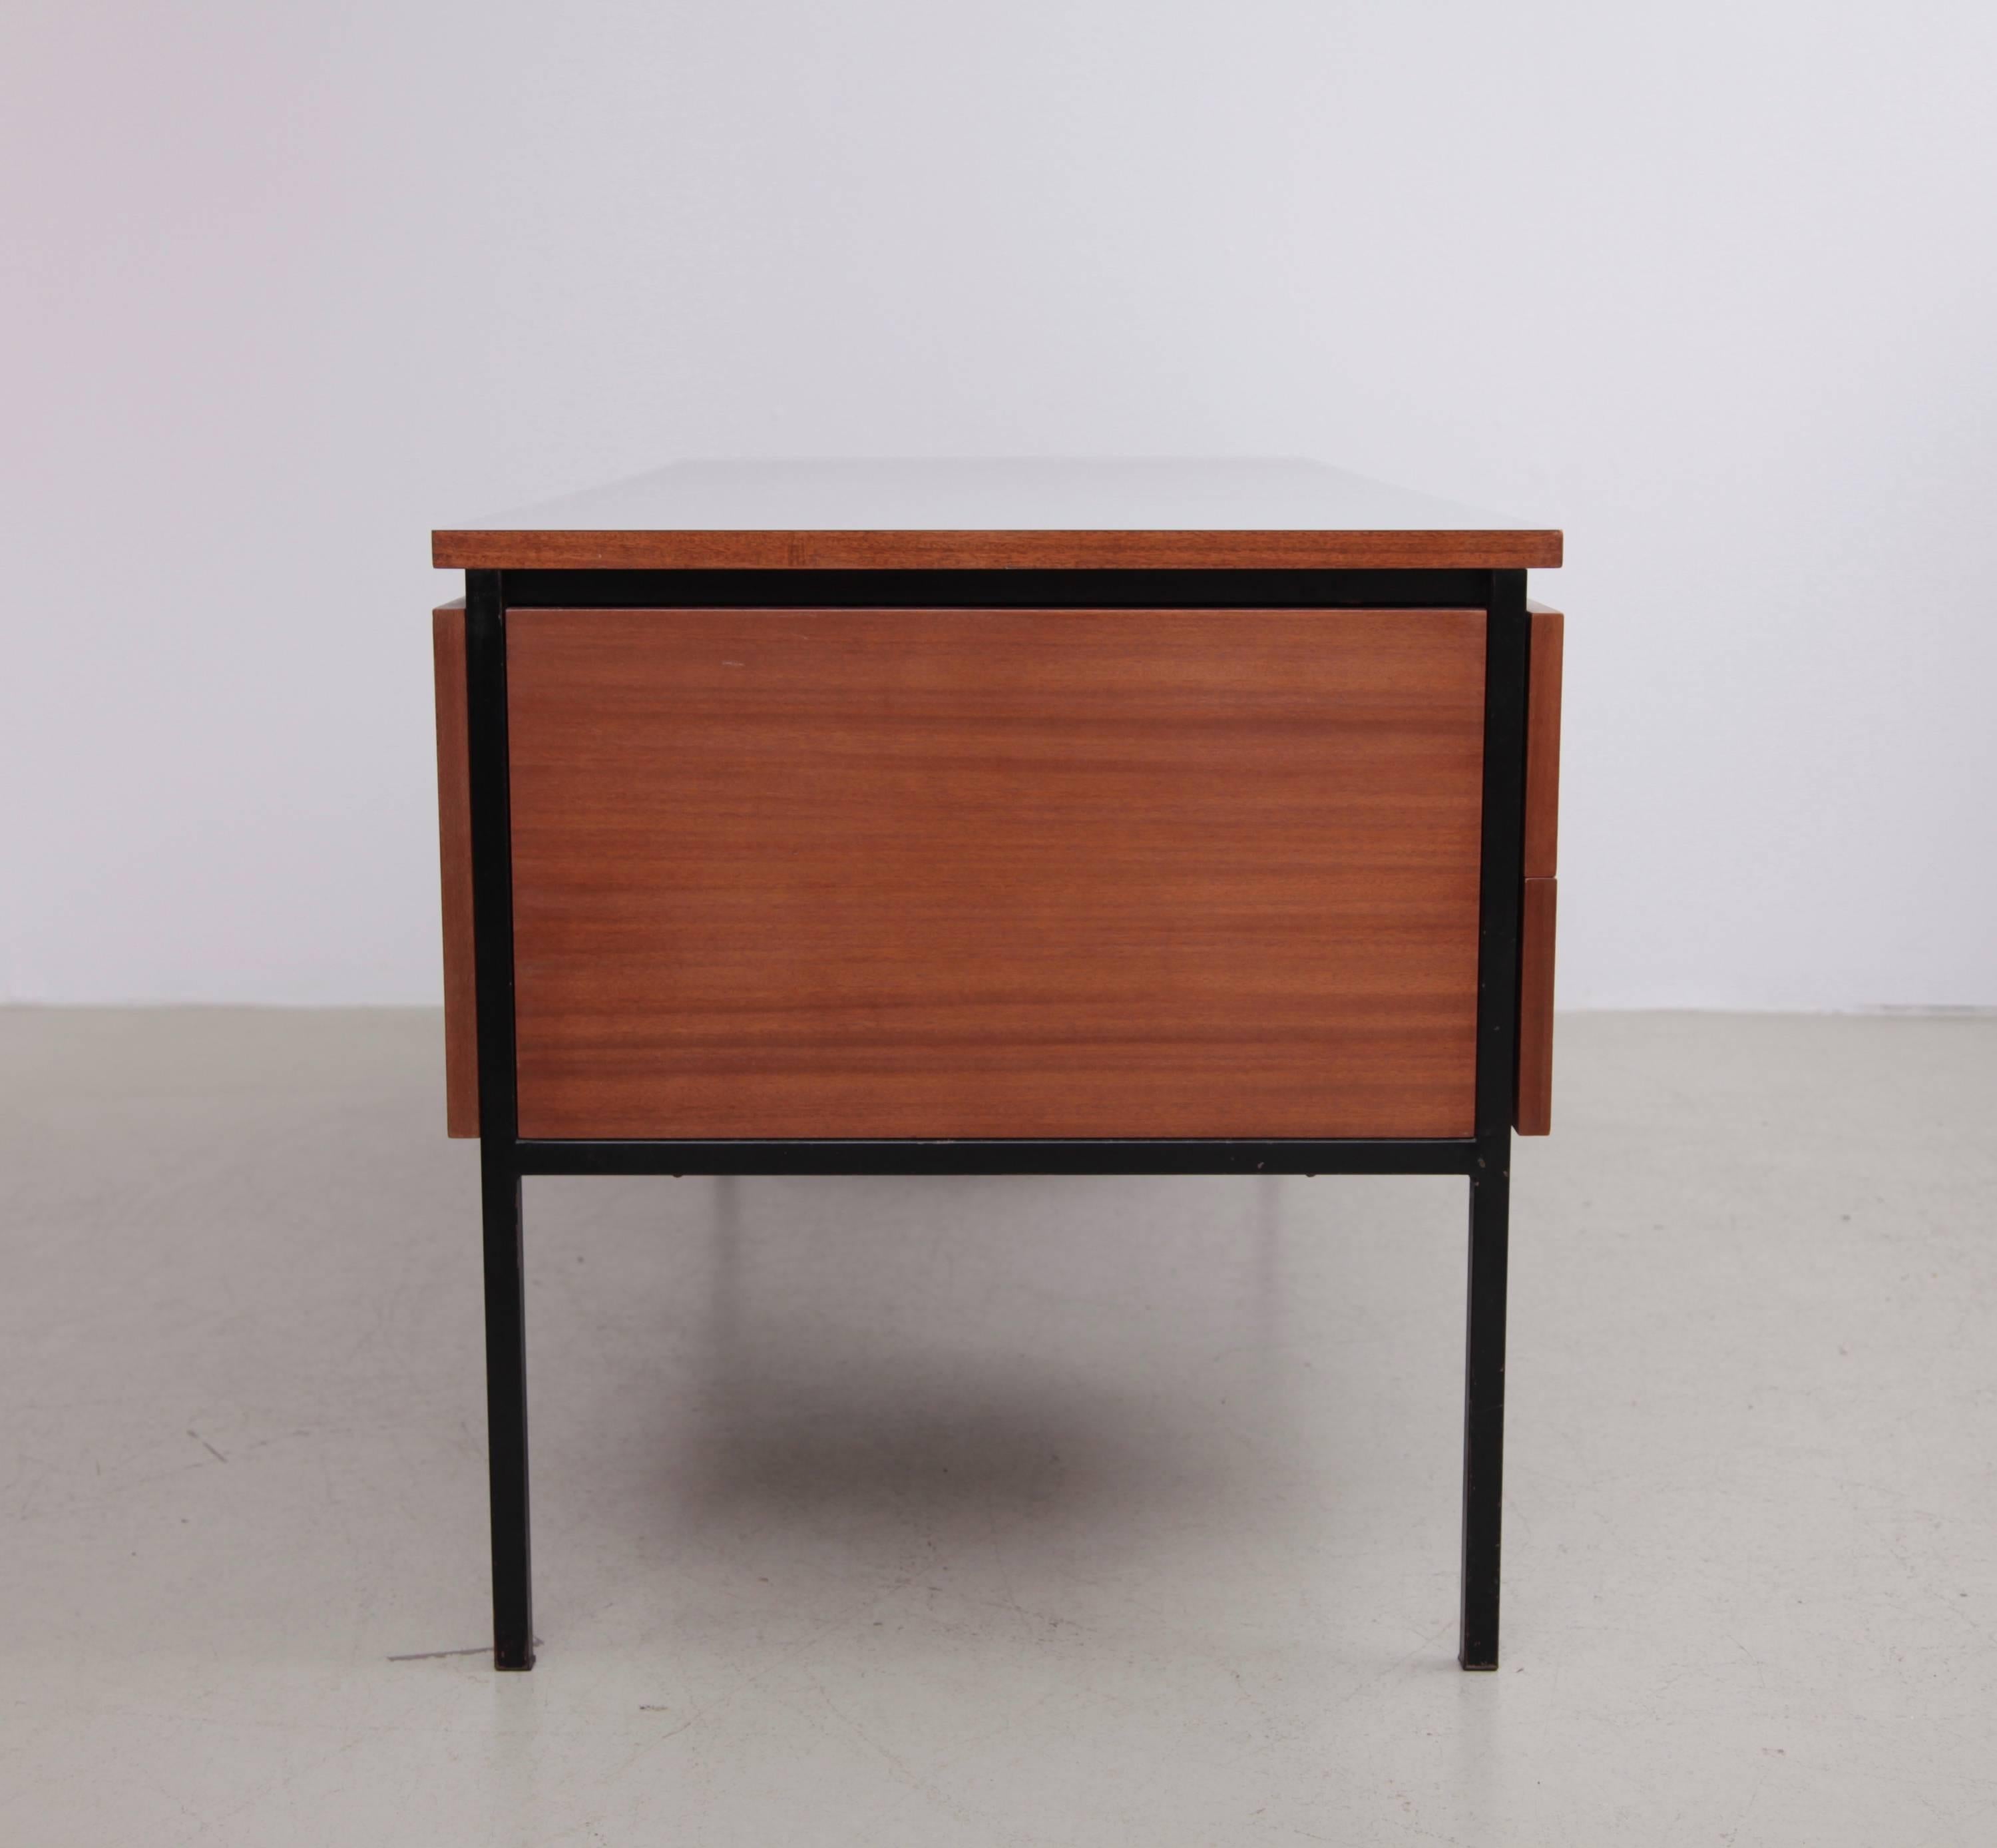 Mid-Century Modern Mahogany Desk with grey formica by Pierre Guariche for Minivelle, France, 1960s